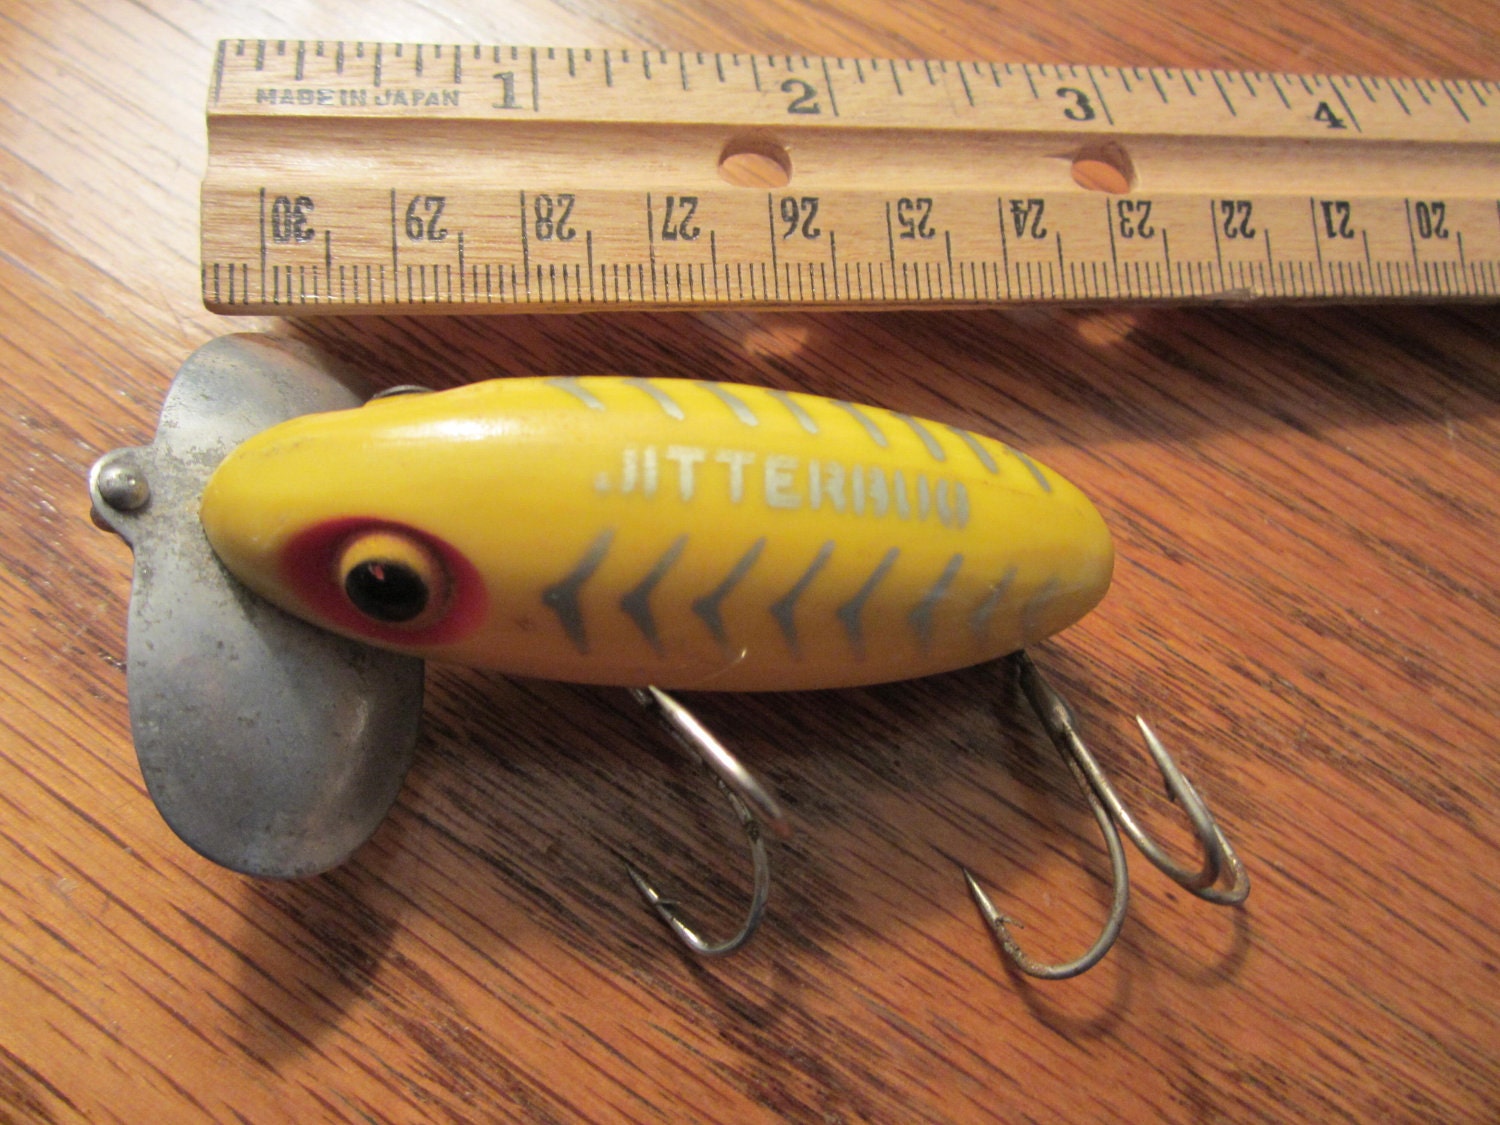 Jitterbug Lure By Fred Arbogast